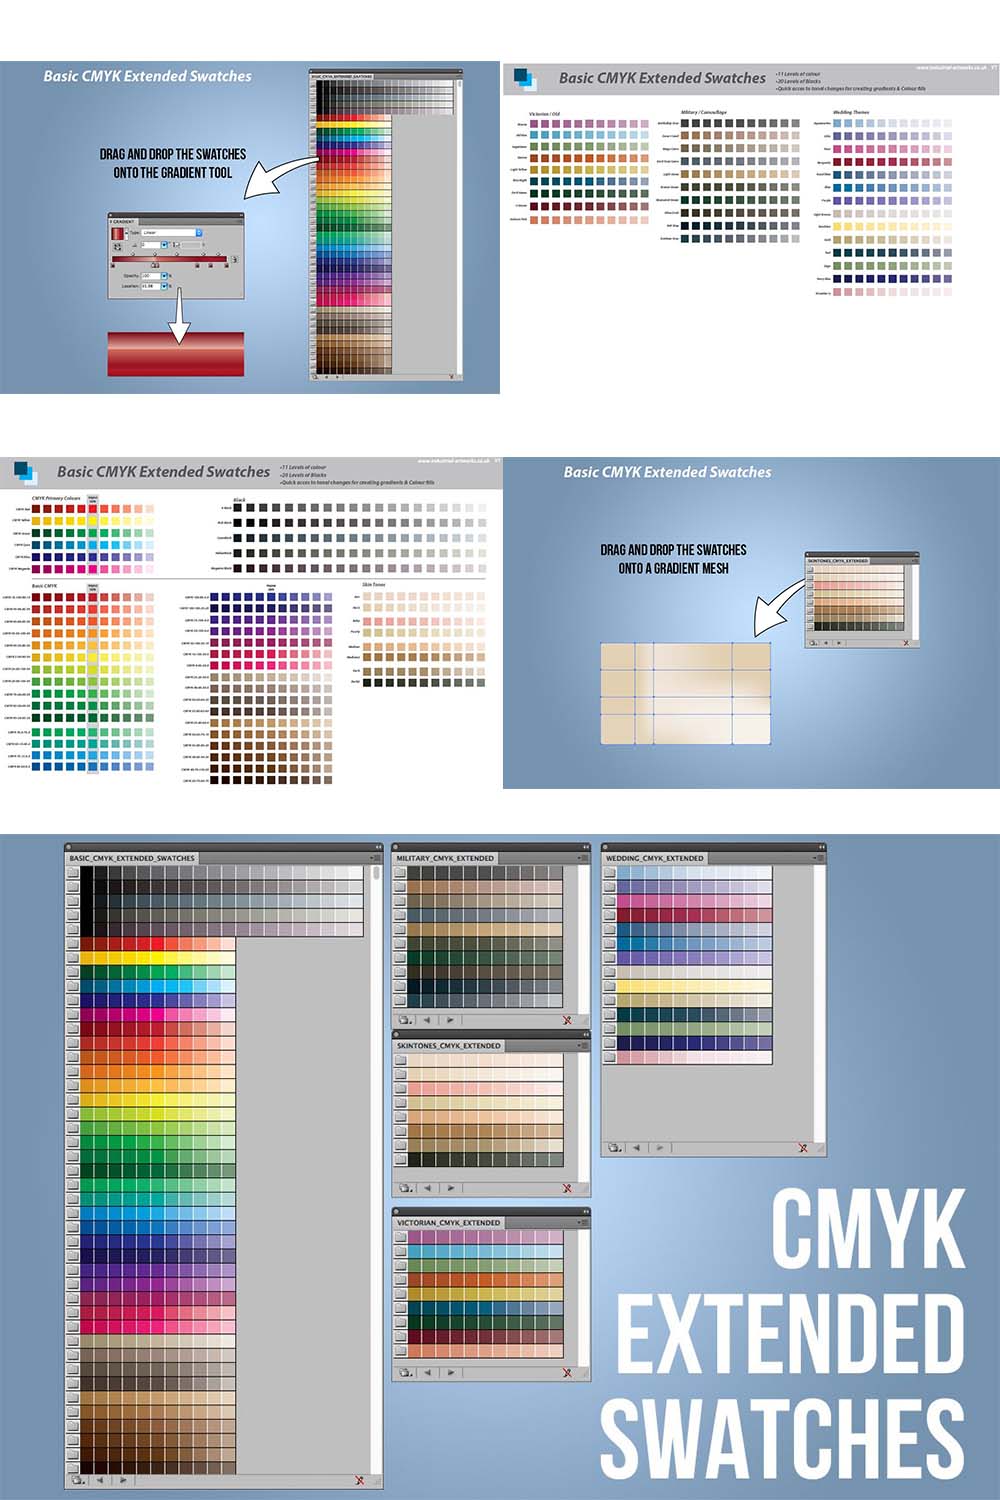 CMYK Extended Swatches Pinterest image.